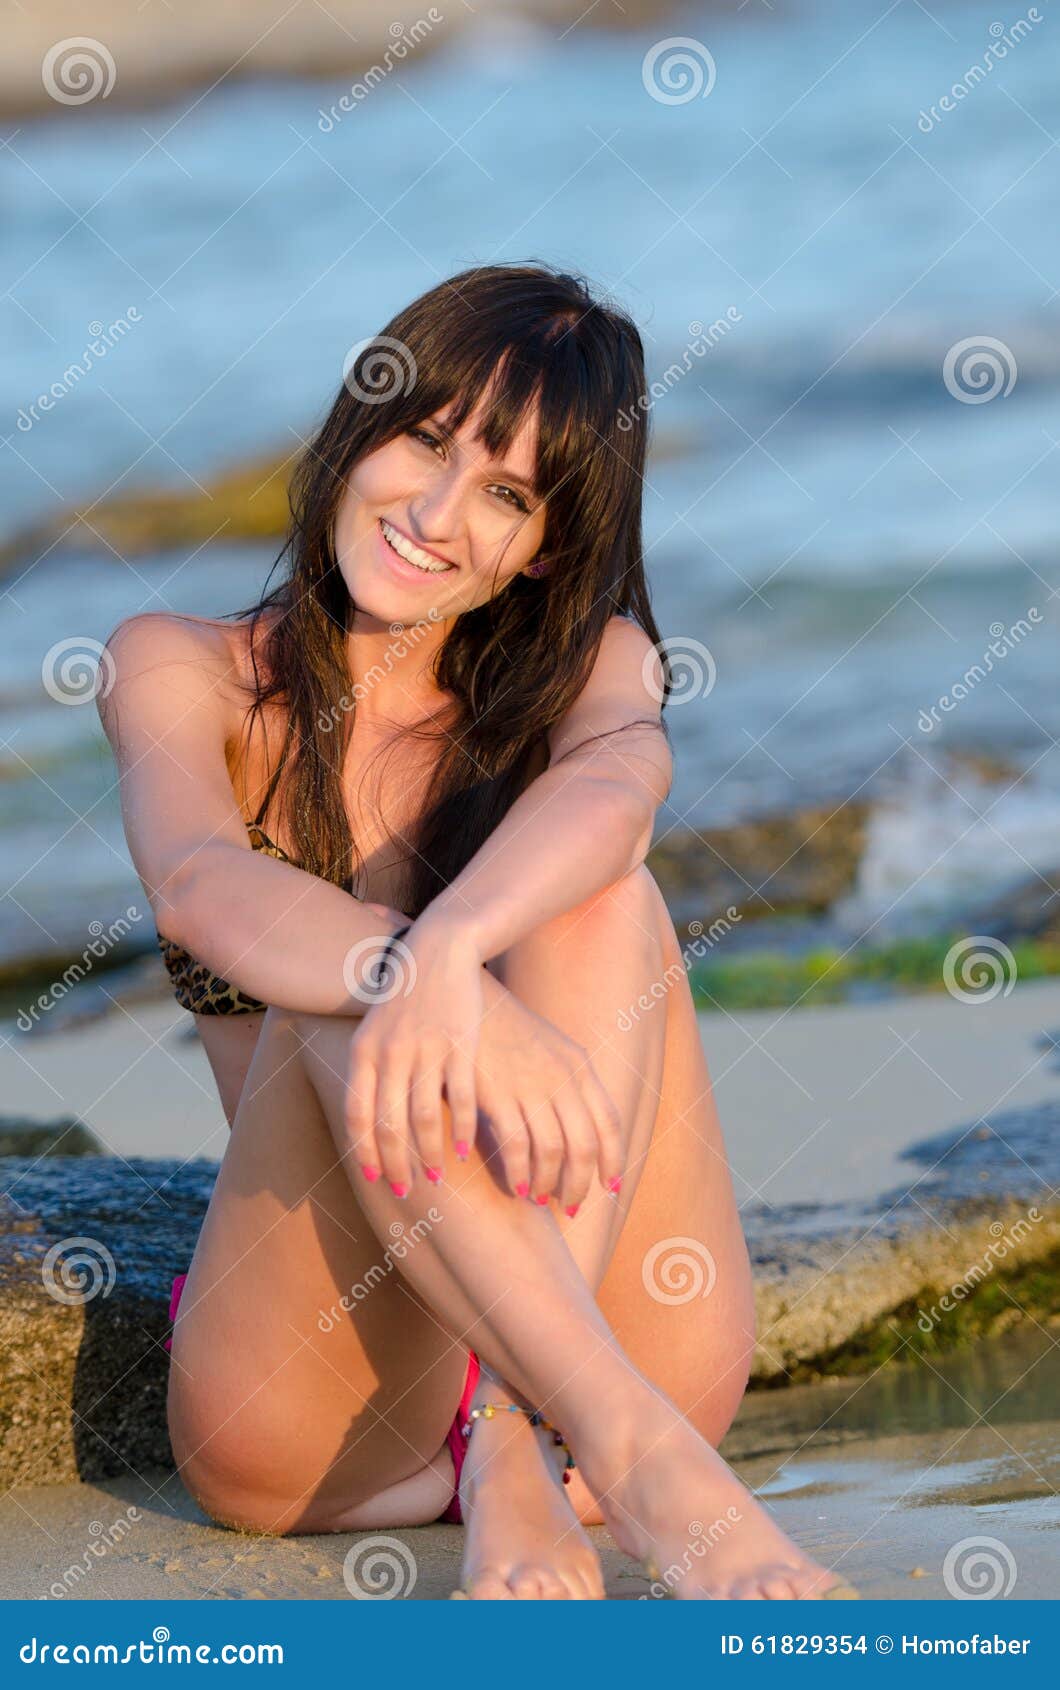 Lady Late Afternoon at the Beach with Bikini Stock Photo pic